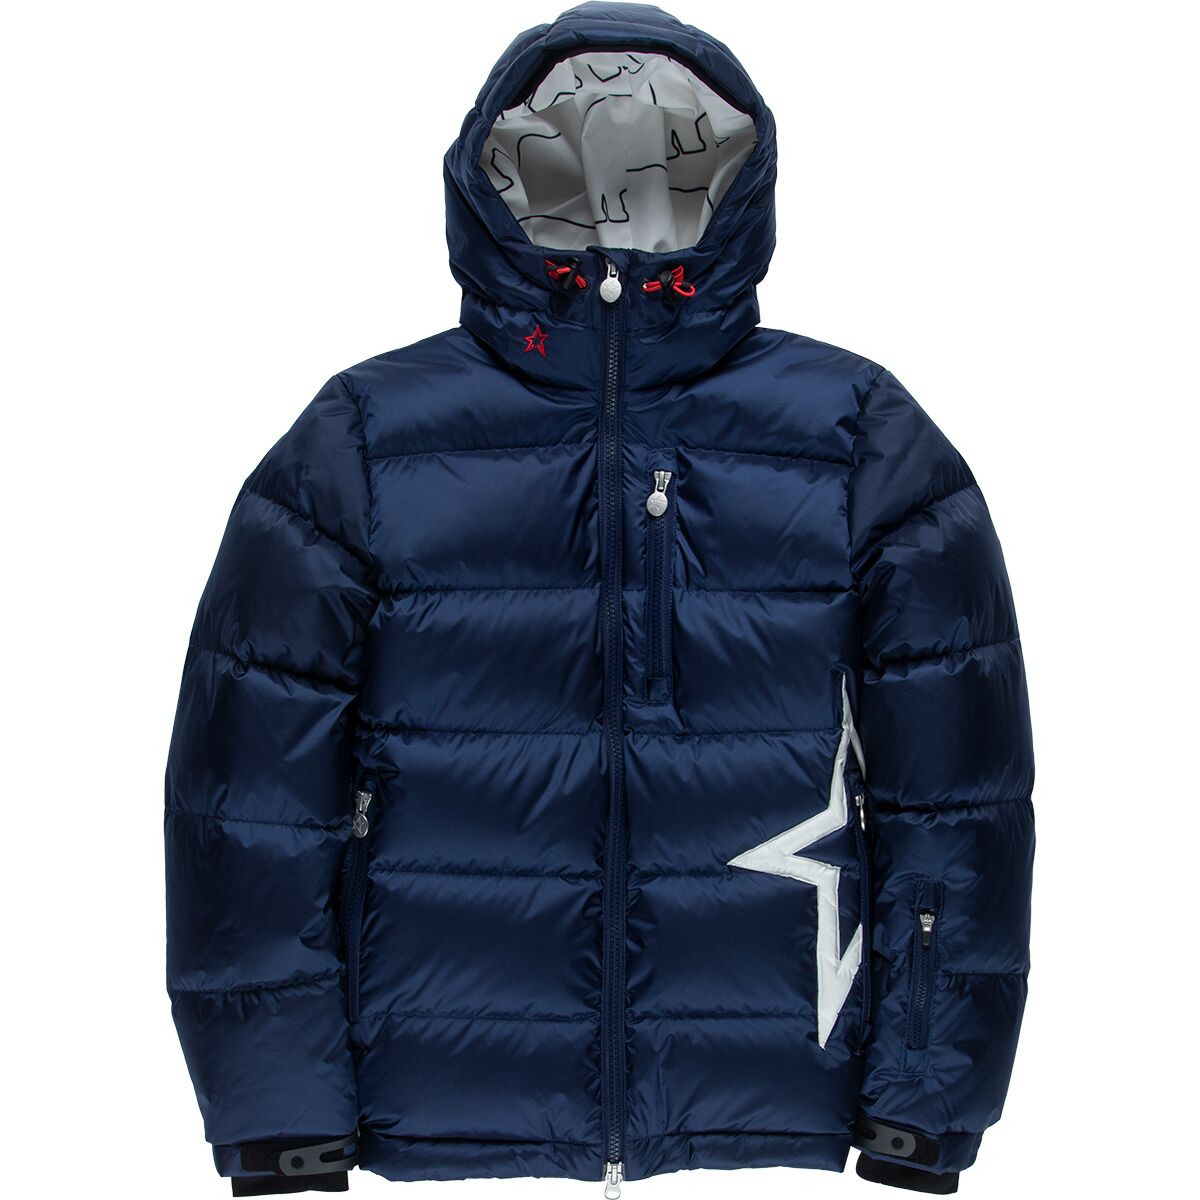 Super Mojo Jacket - Girls' by Perfect Moment | US-Parks.com